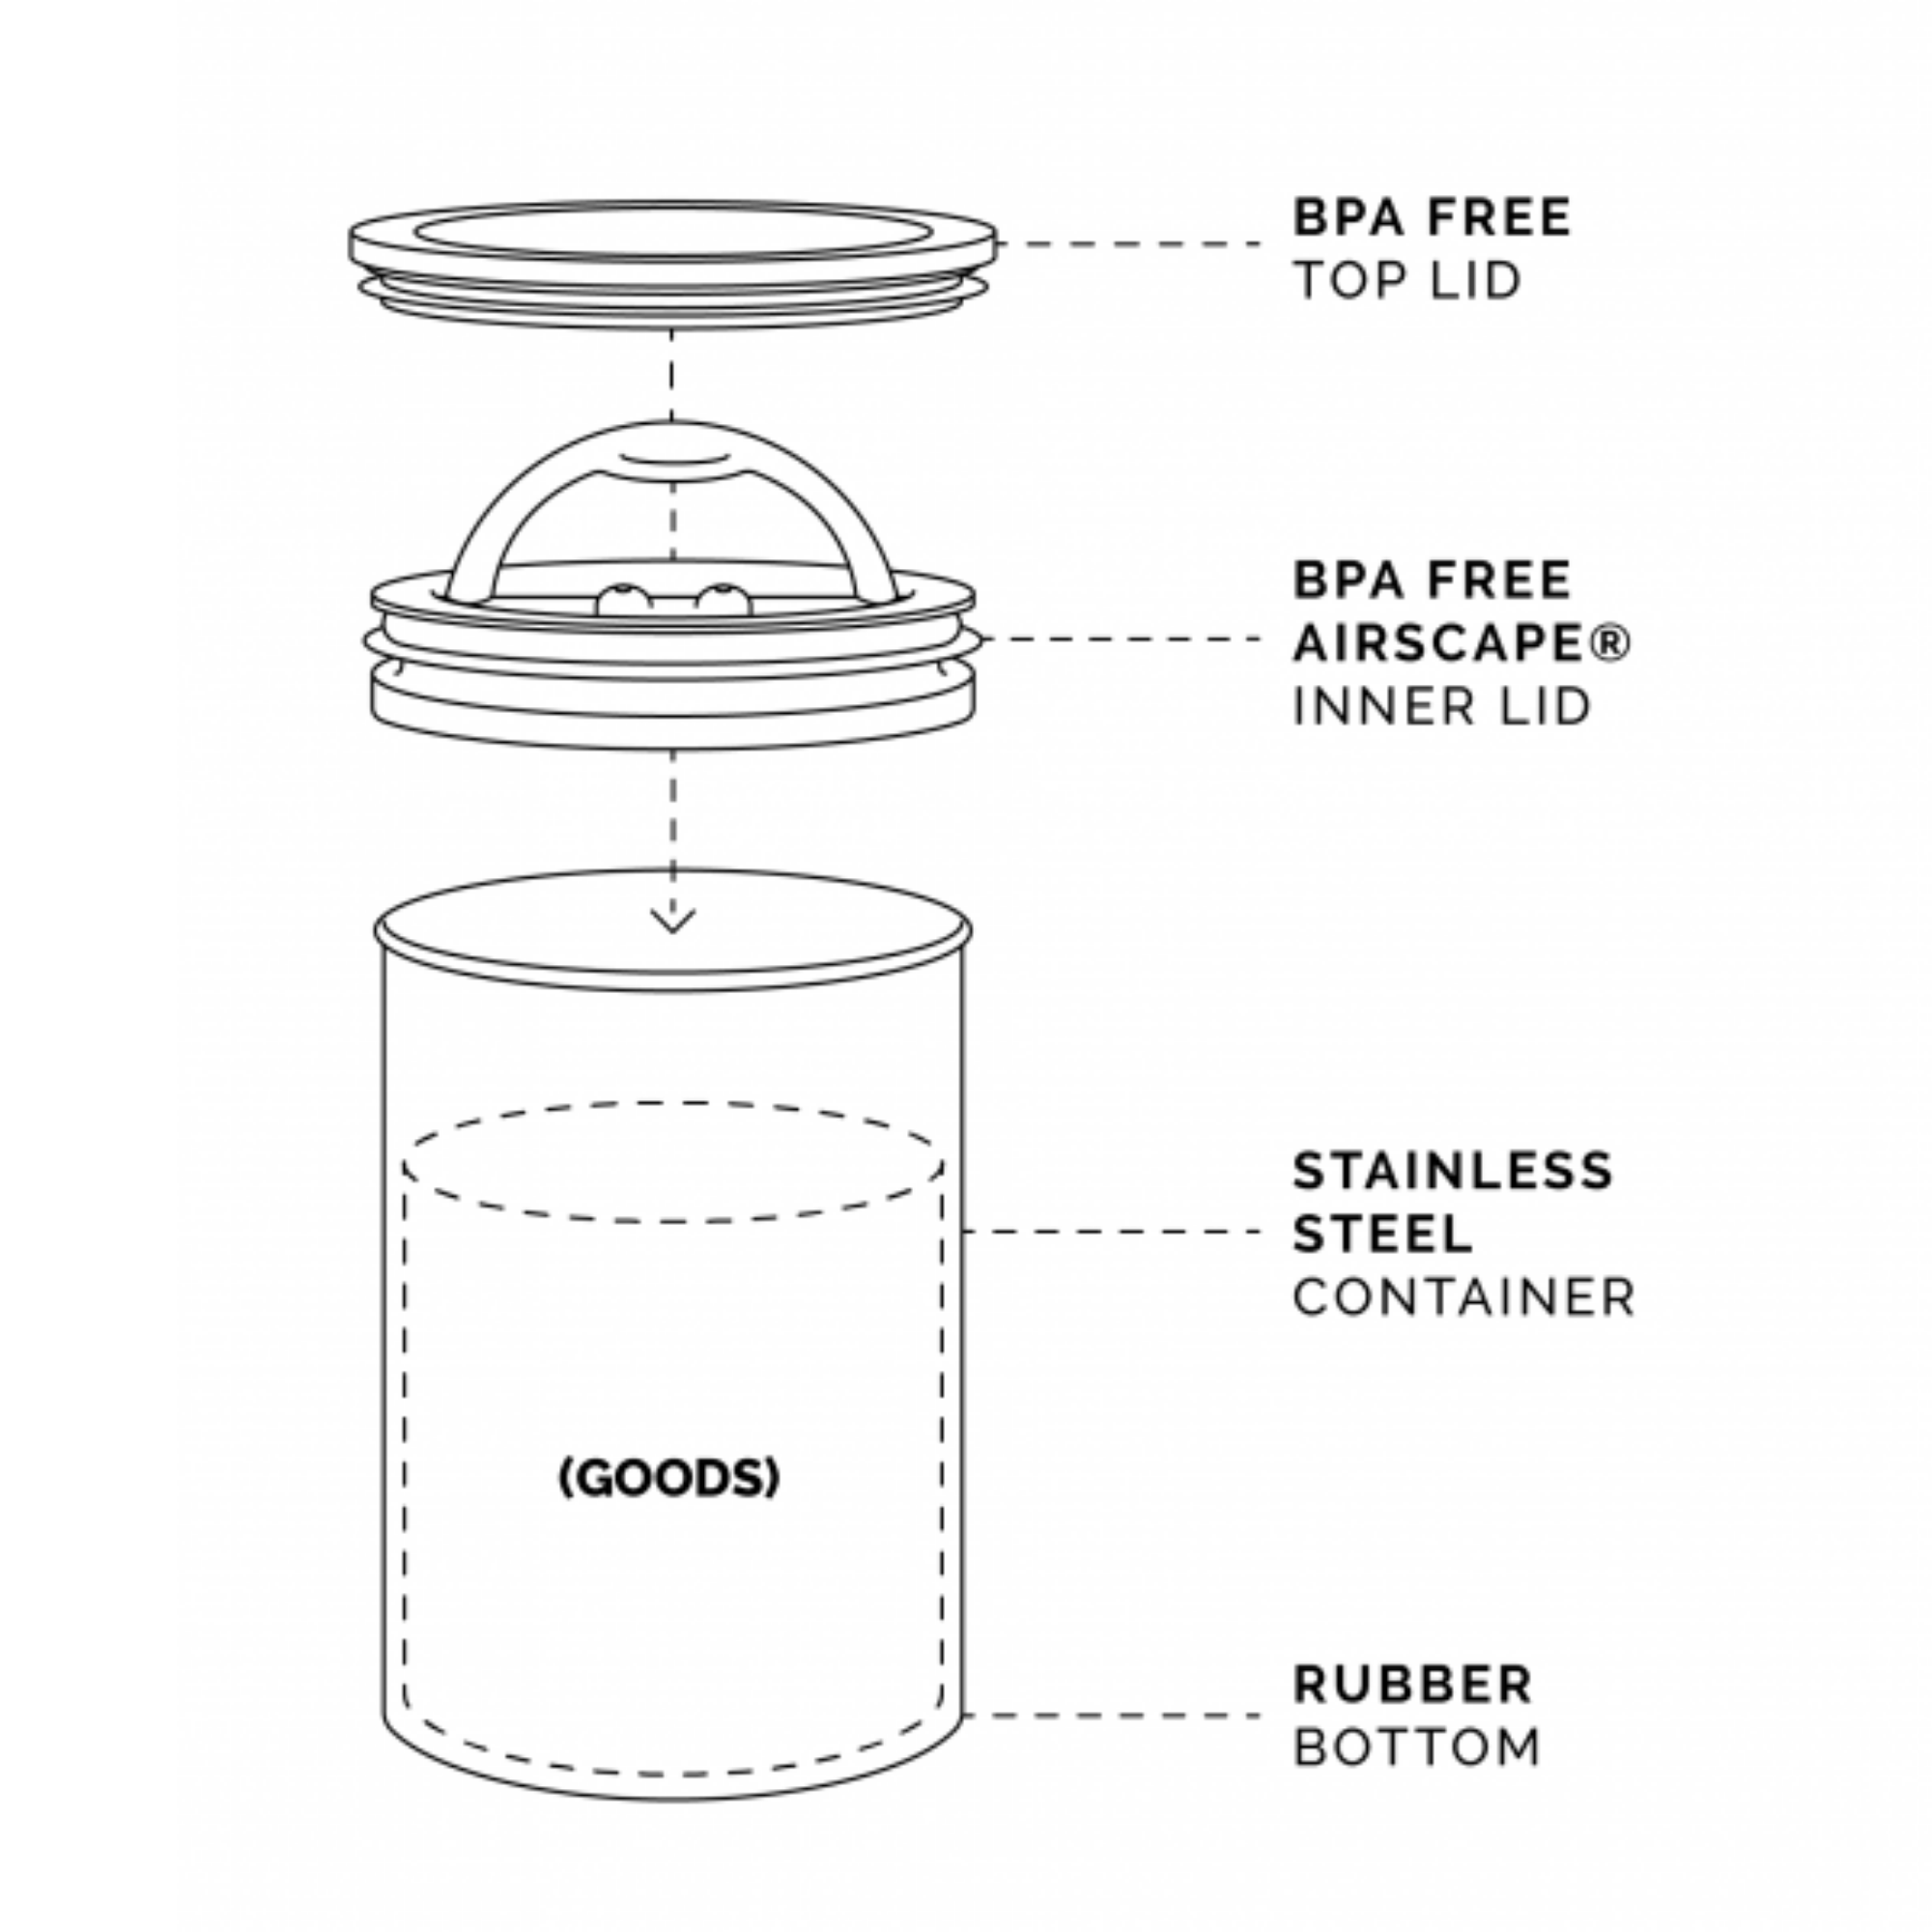 illustration of the Airscape canister, showing the BPA-free top lid, the BPA-free Airscape patented inner lid, the stainless steel container, an outline of where the goods would be in the canister, and the rubberized bottom